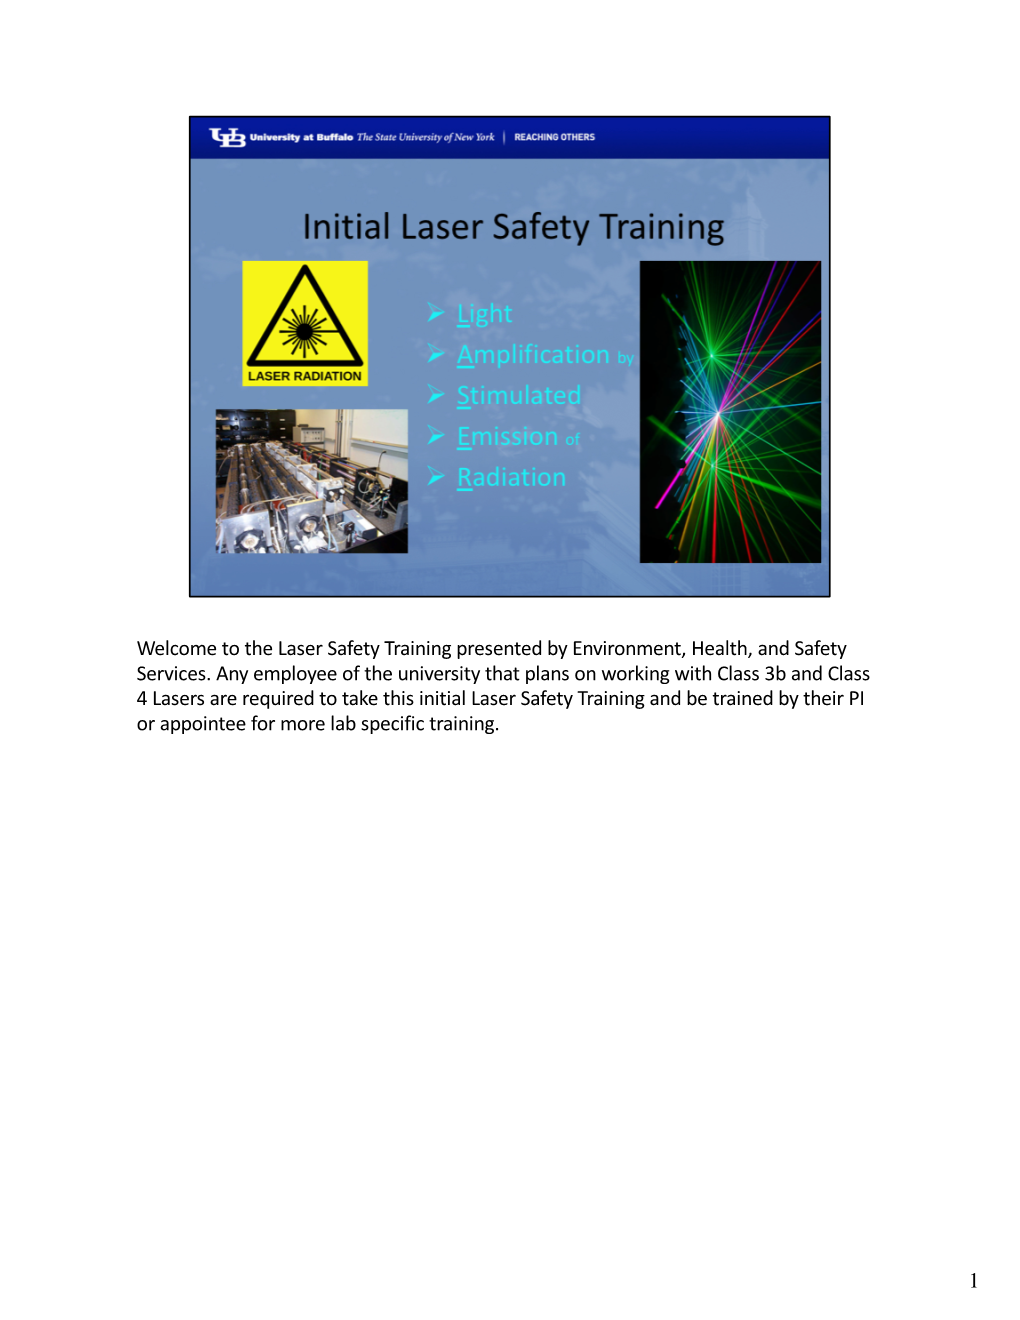 Initial Laser Safety Training and Be Trained by Their PI Or Appointee for More Lab Specific Training